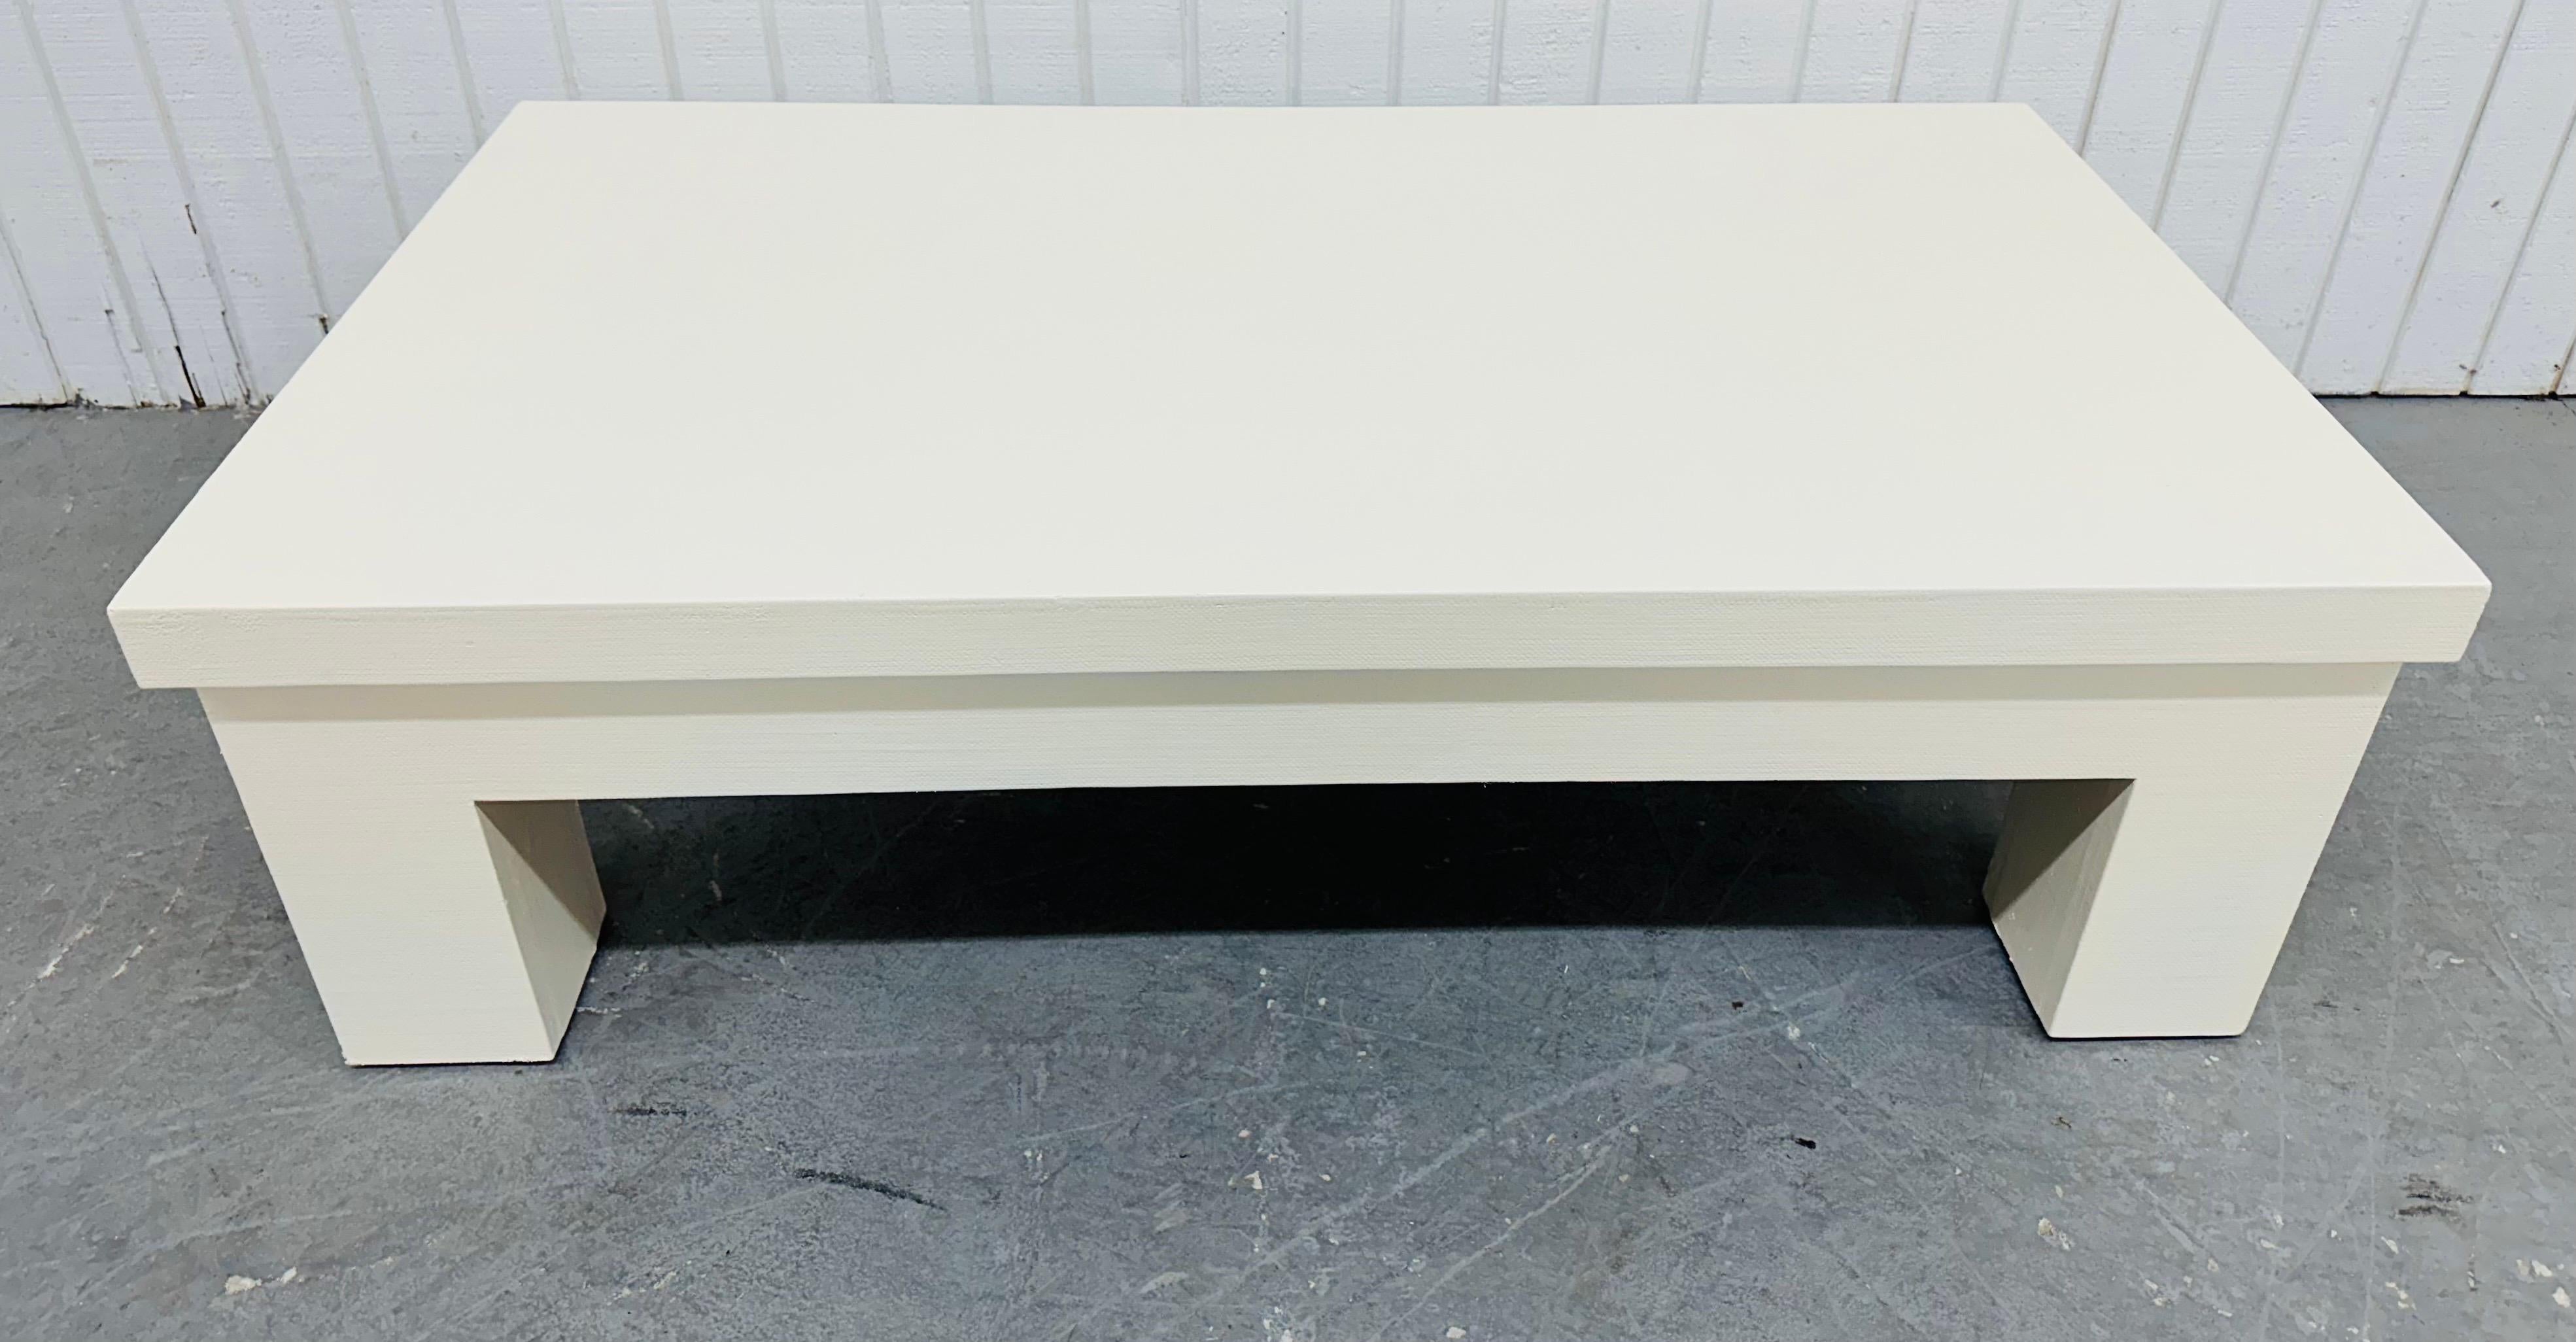 This listing is for a Post-Modern Karl Springer Style Coffee Table. Featuring a straight line design, rectangular top, thick modern legs, linen wrapped with an off white finish. This is an exceptional combination of quality and design!